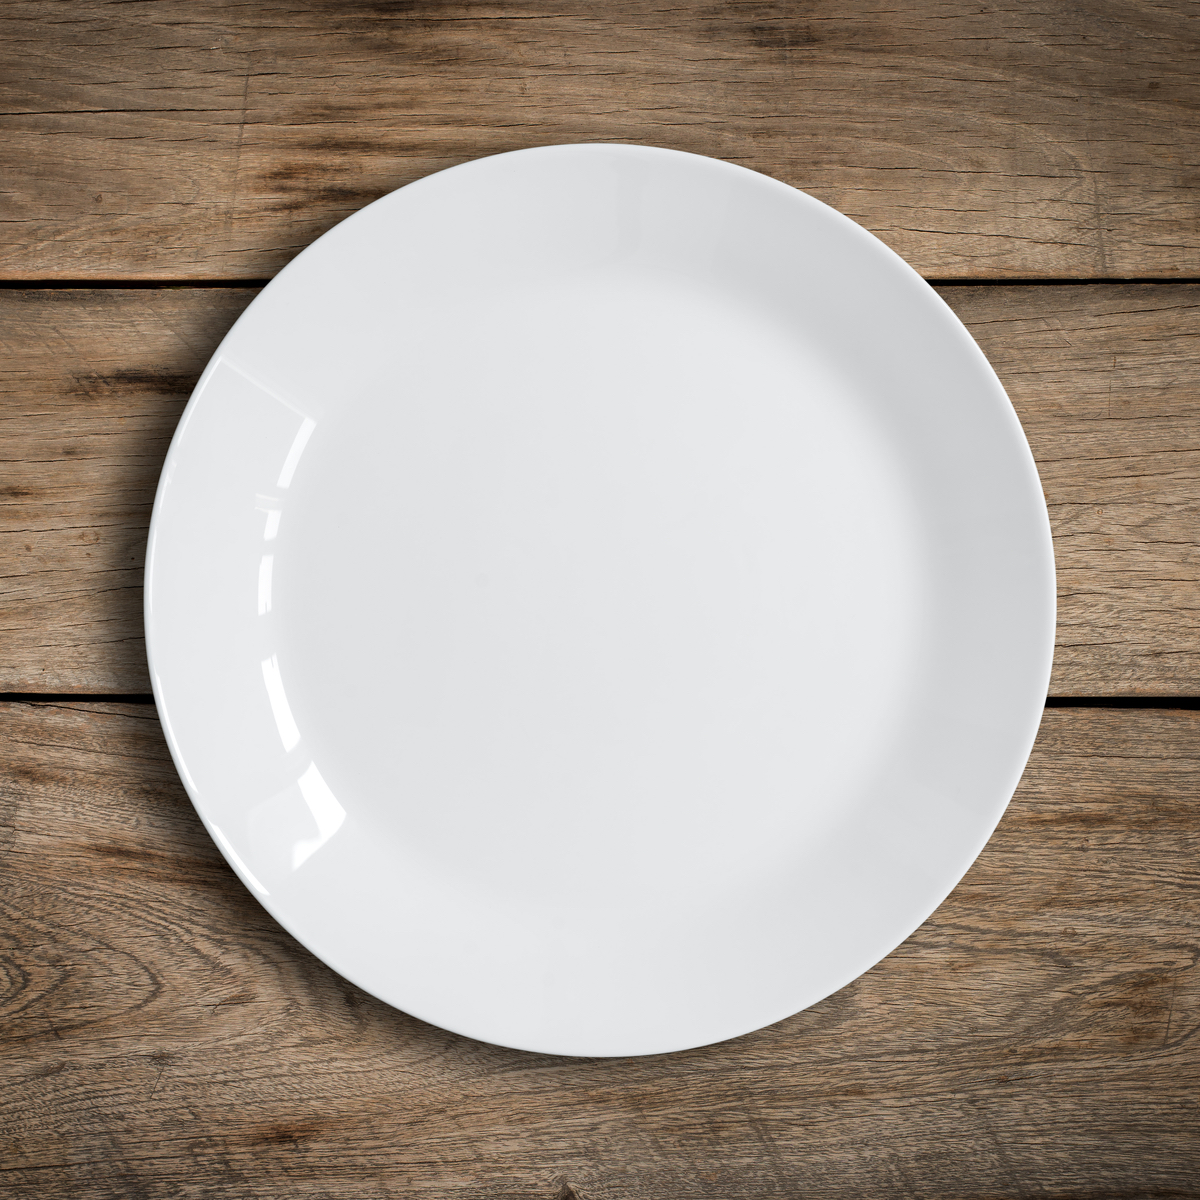 Is Intermittent Fasting a Productivity and Anti-Aging Hack?